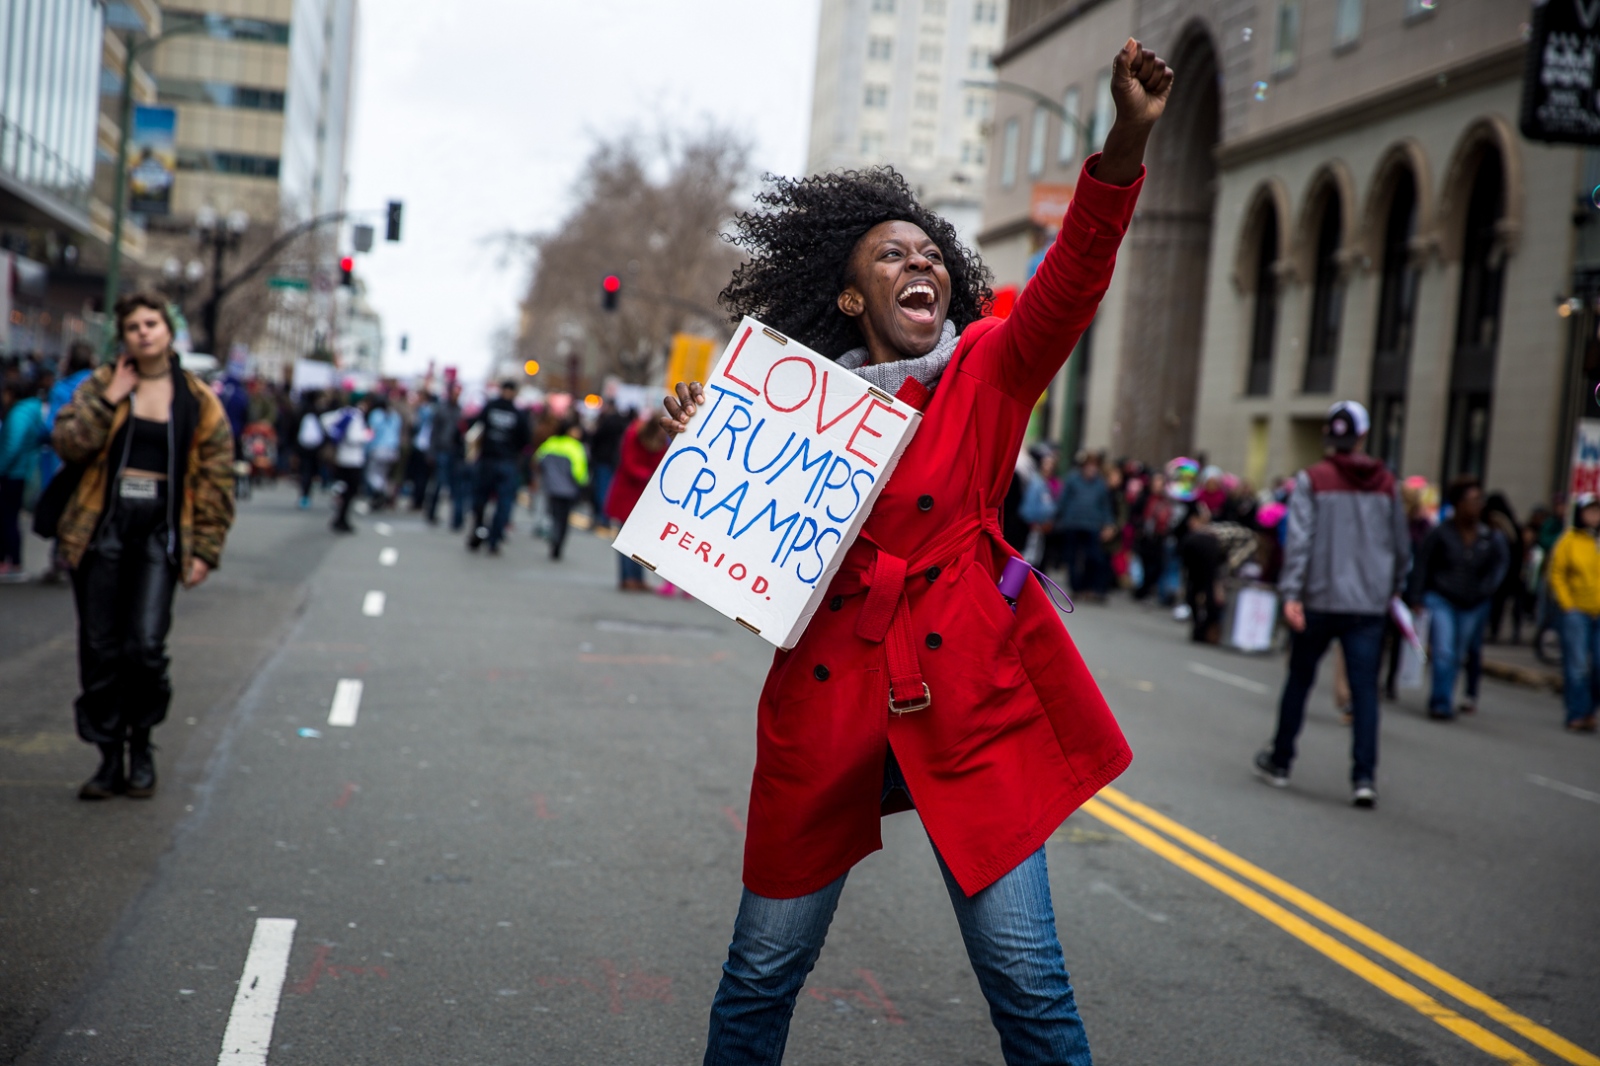 A jubilant demonstrator at the end of the Women's March in Oakland, CA, January 21, 2017. An estimated 60,000 people participated in the...